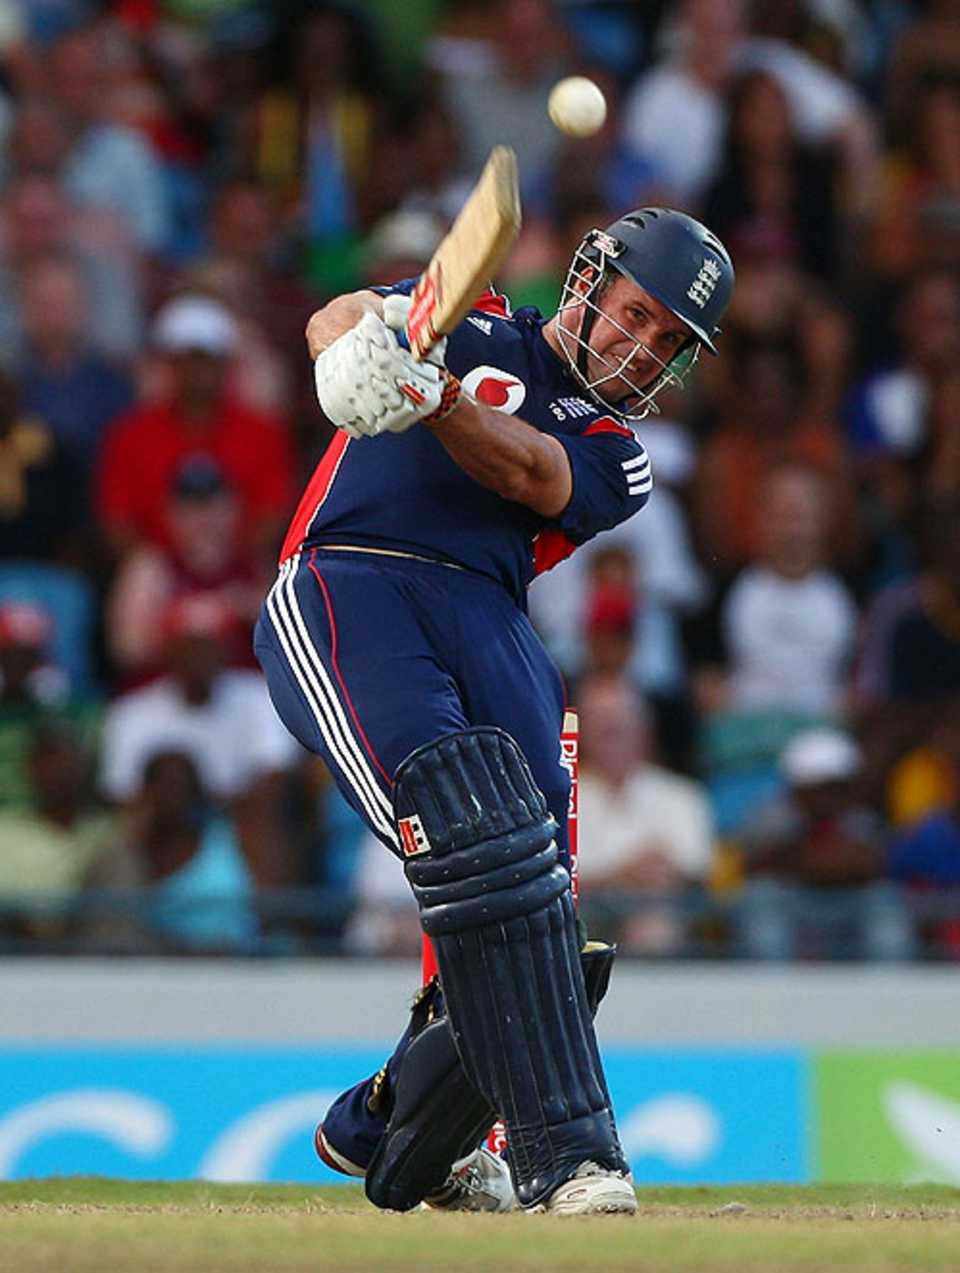 Andrew Strauss cracked an unbeaten 79 from 61 balls to seal a series-levelling win